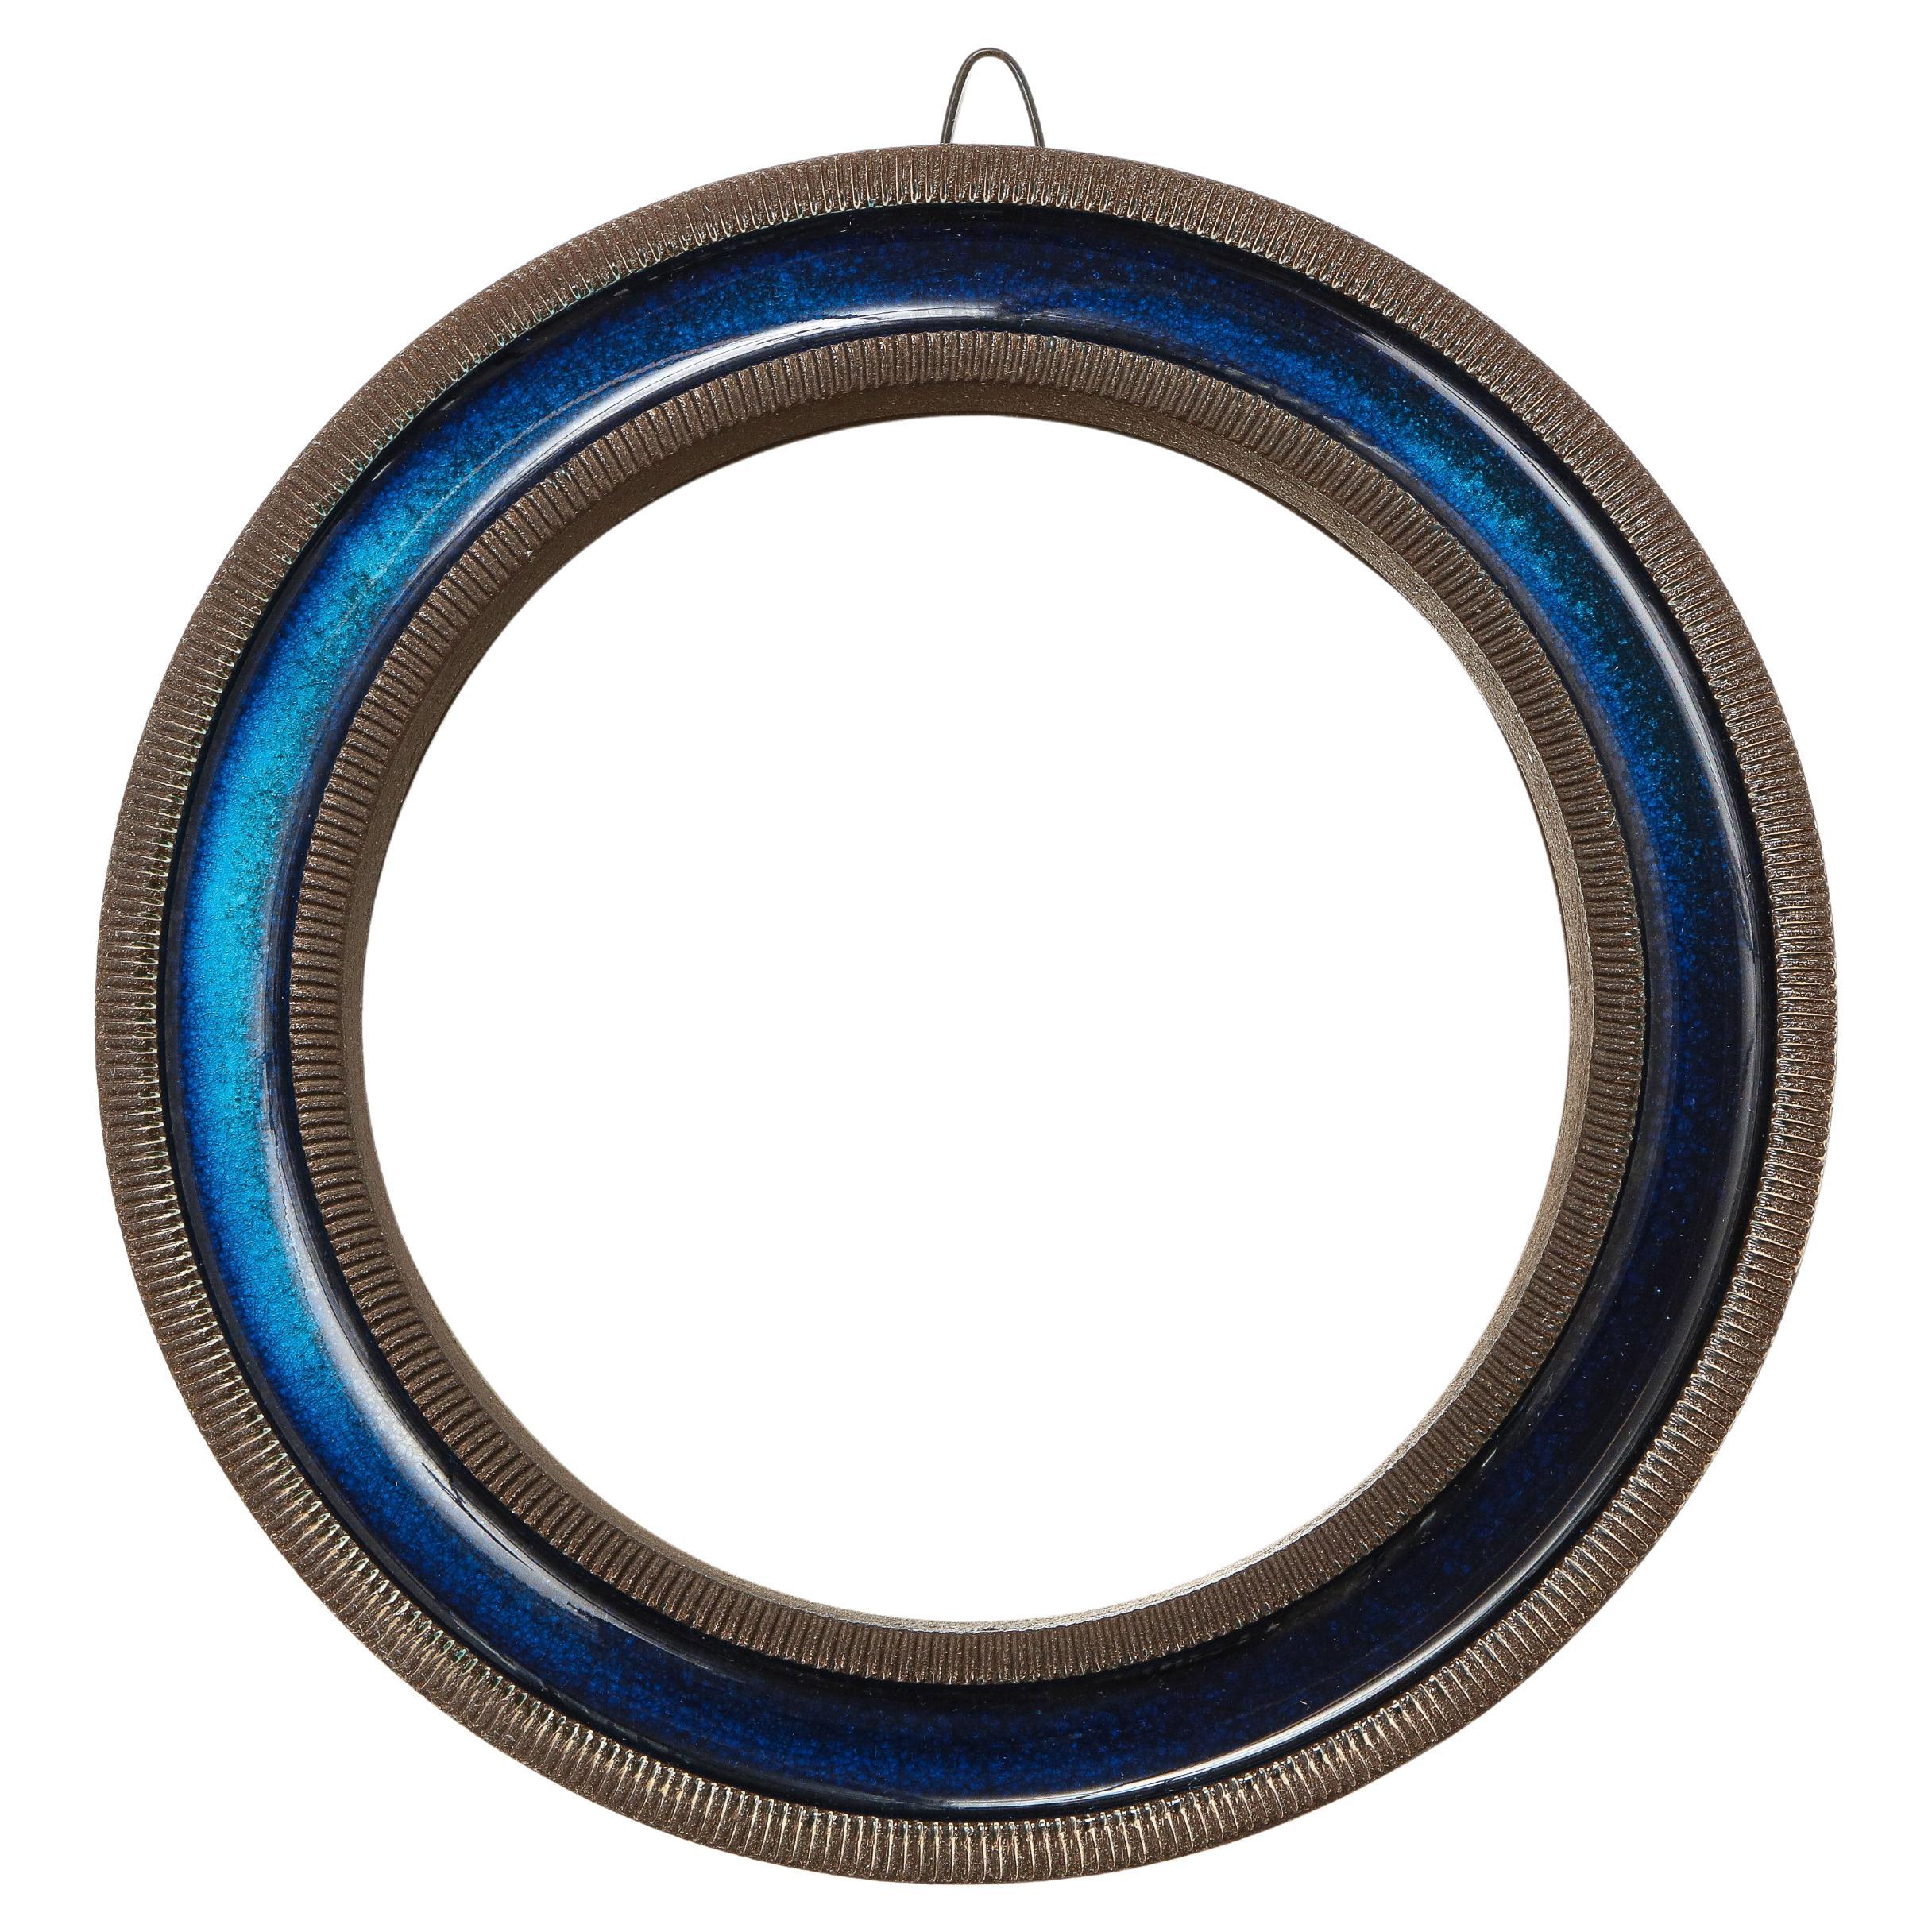 Erik Reiff for Knabstrup mirror, ceramic, blue, signed. Small scale ceramic mirror with alternating rings of texture and color - smooth dark blue glaze and ribbed brown glaze. The back is covered with a natural woven burlap and stamped Knabstrup on